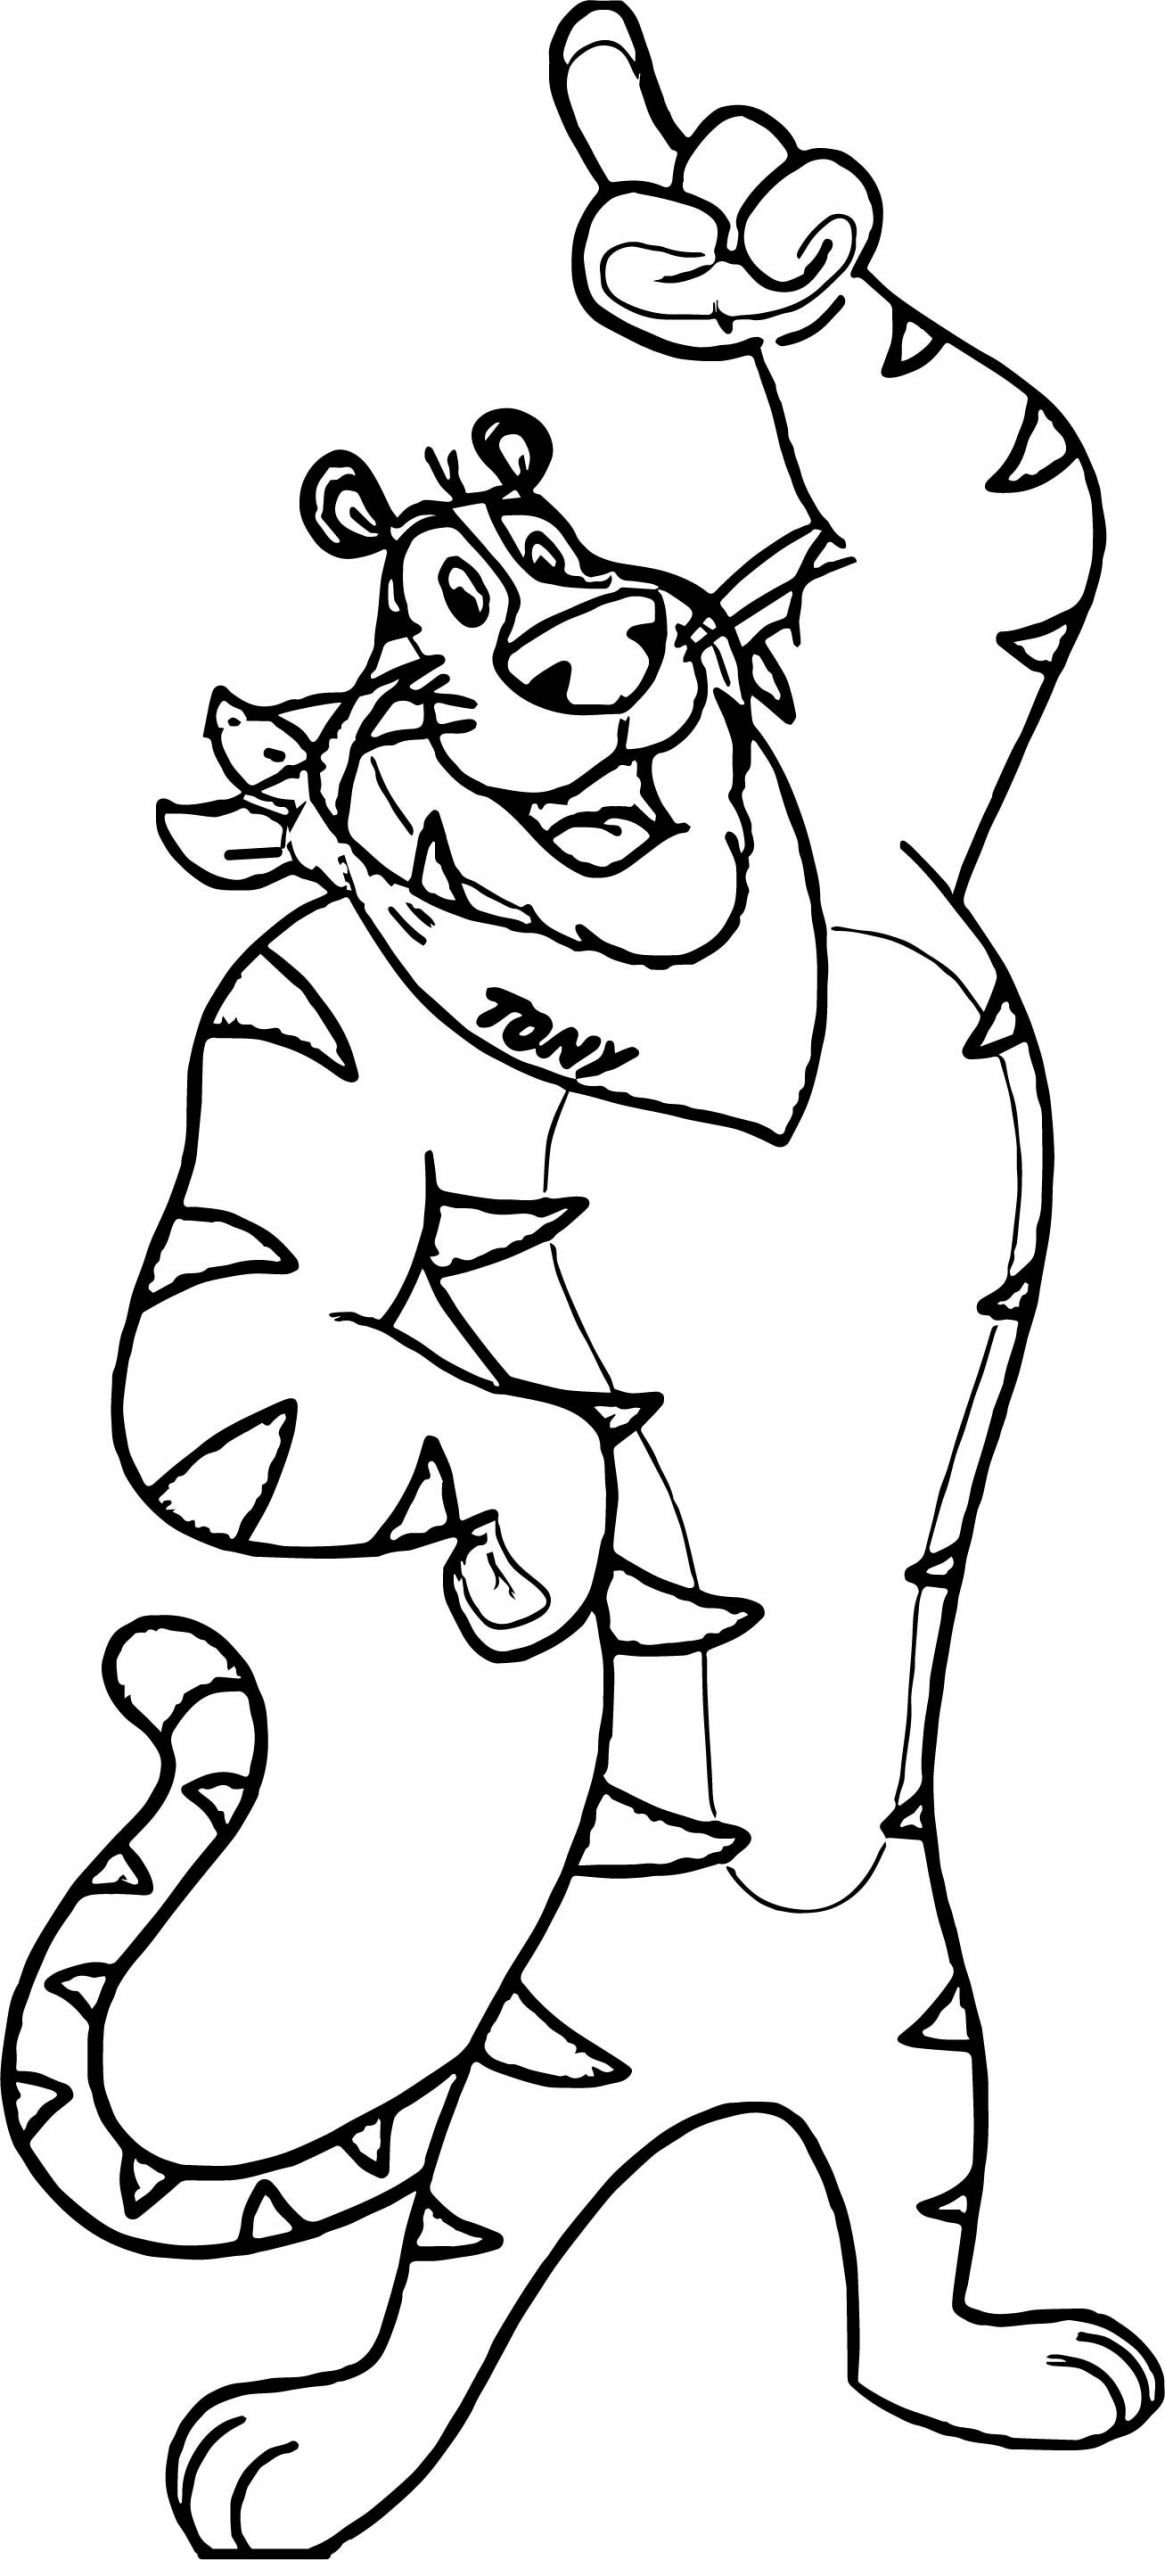 Printables Free Coloring Pages
 Tony Tiger Coloring Page